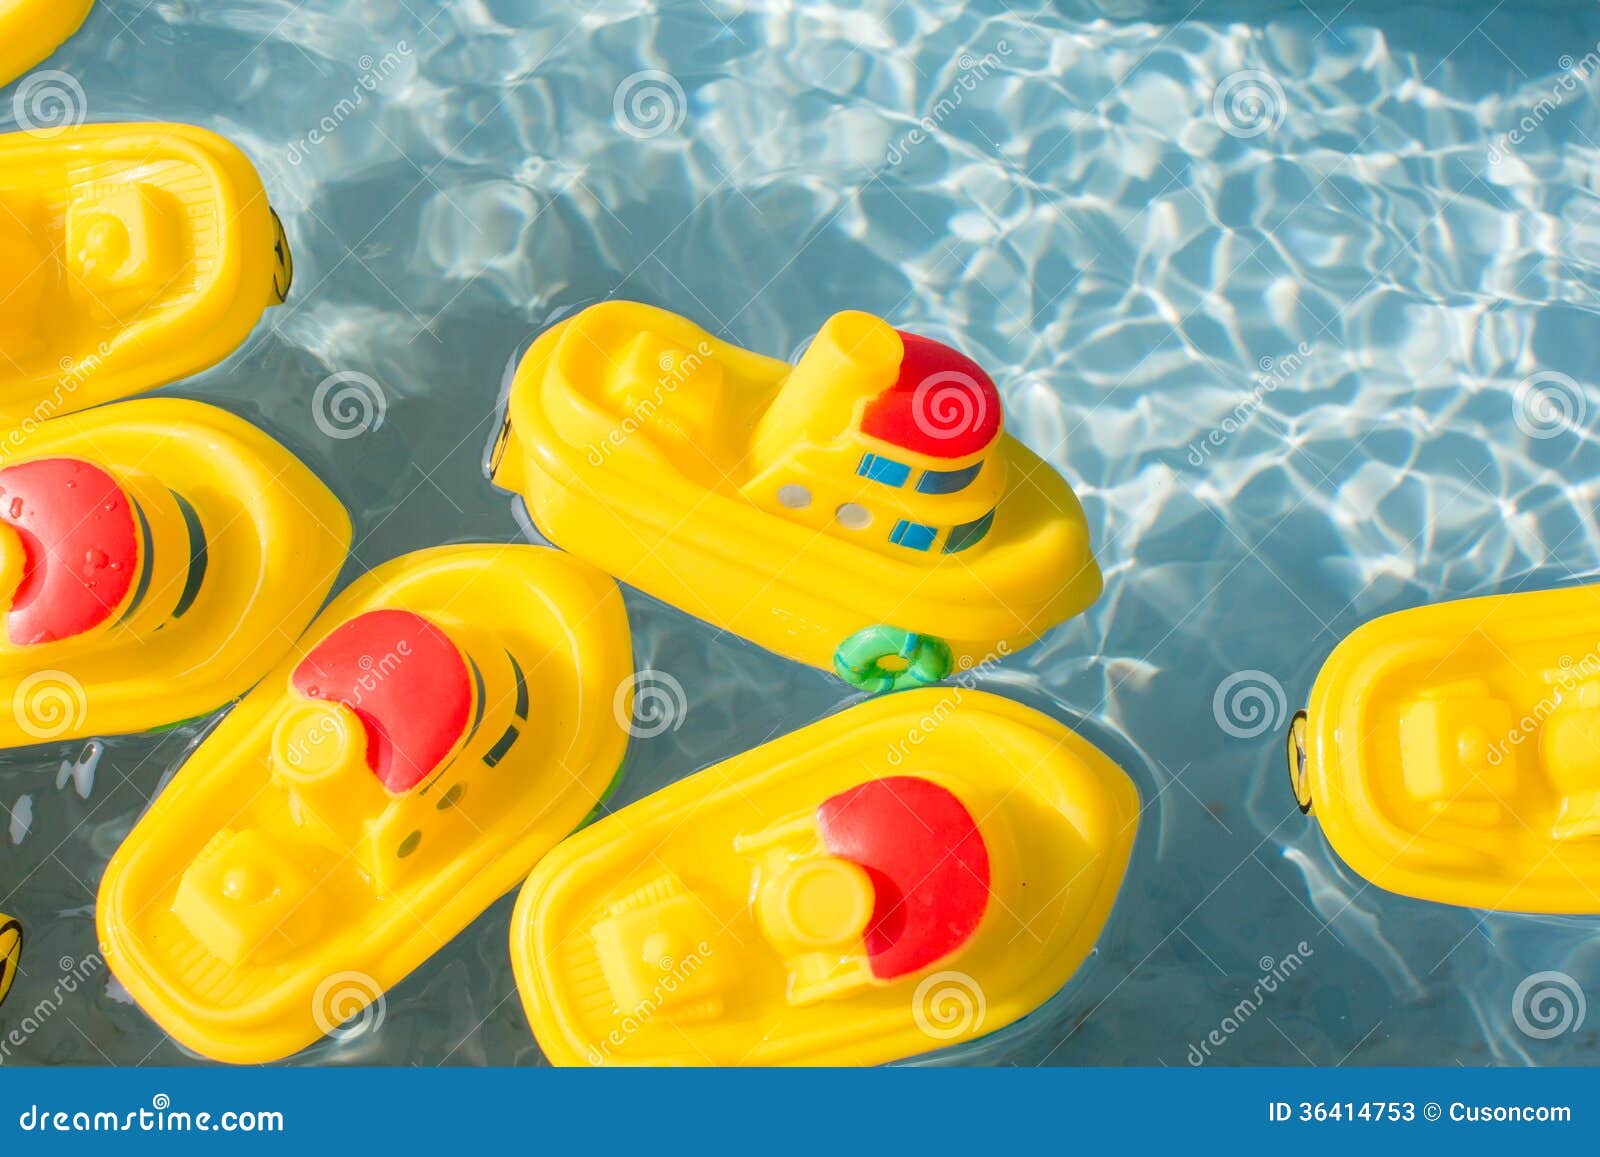 Toy Rubber Boat Stock Photos - Image: 36414753